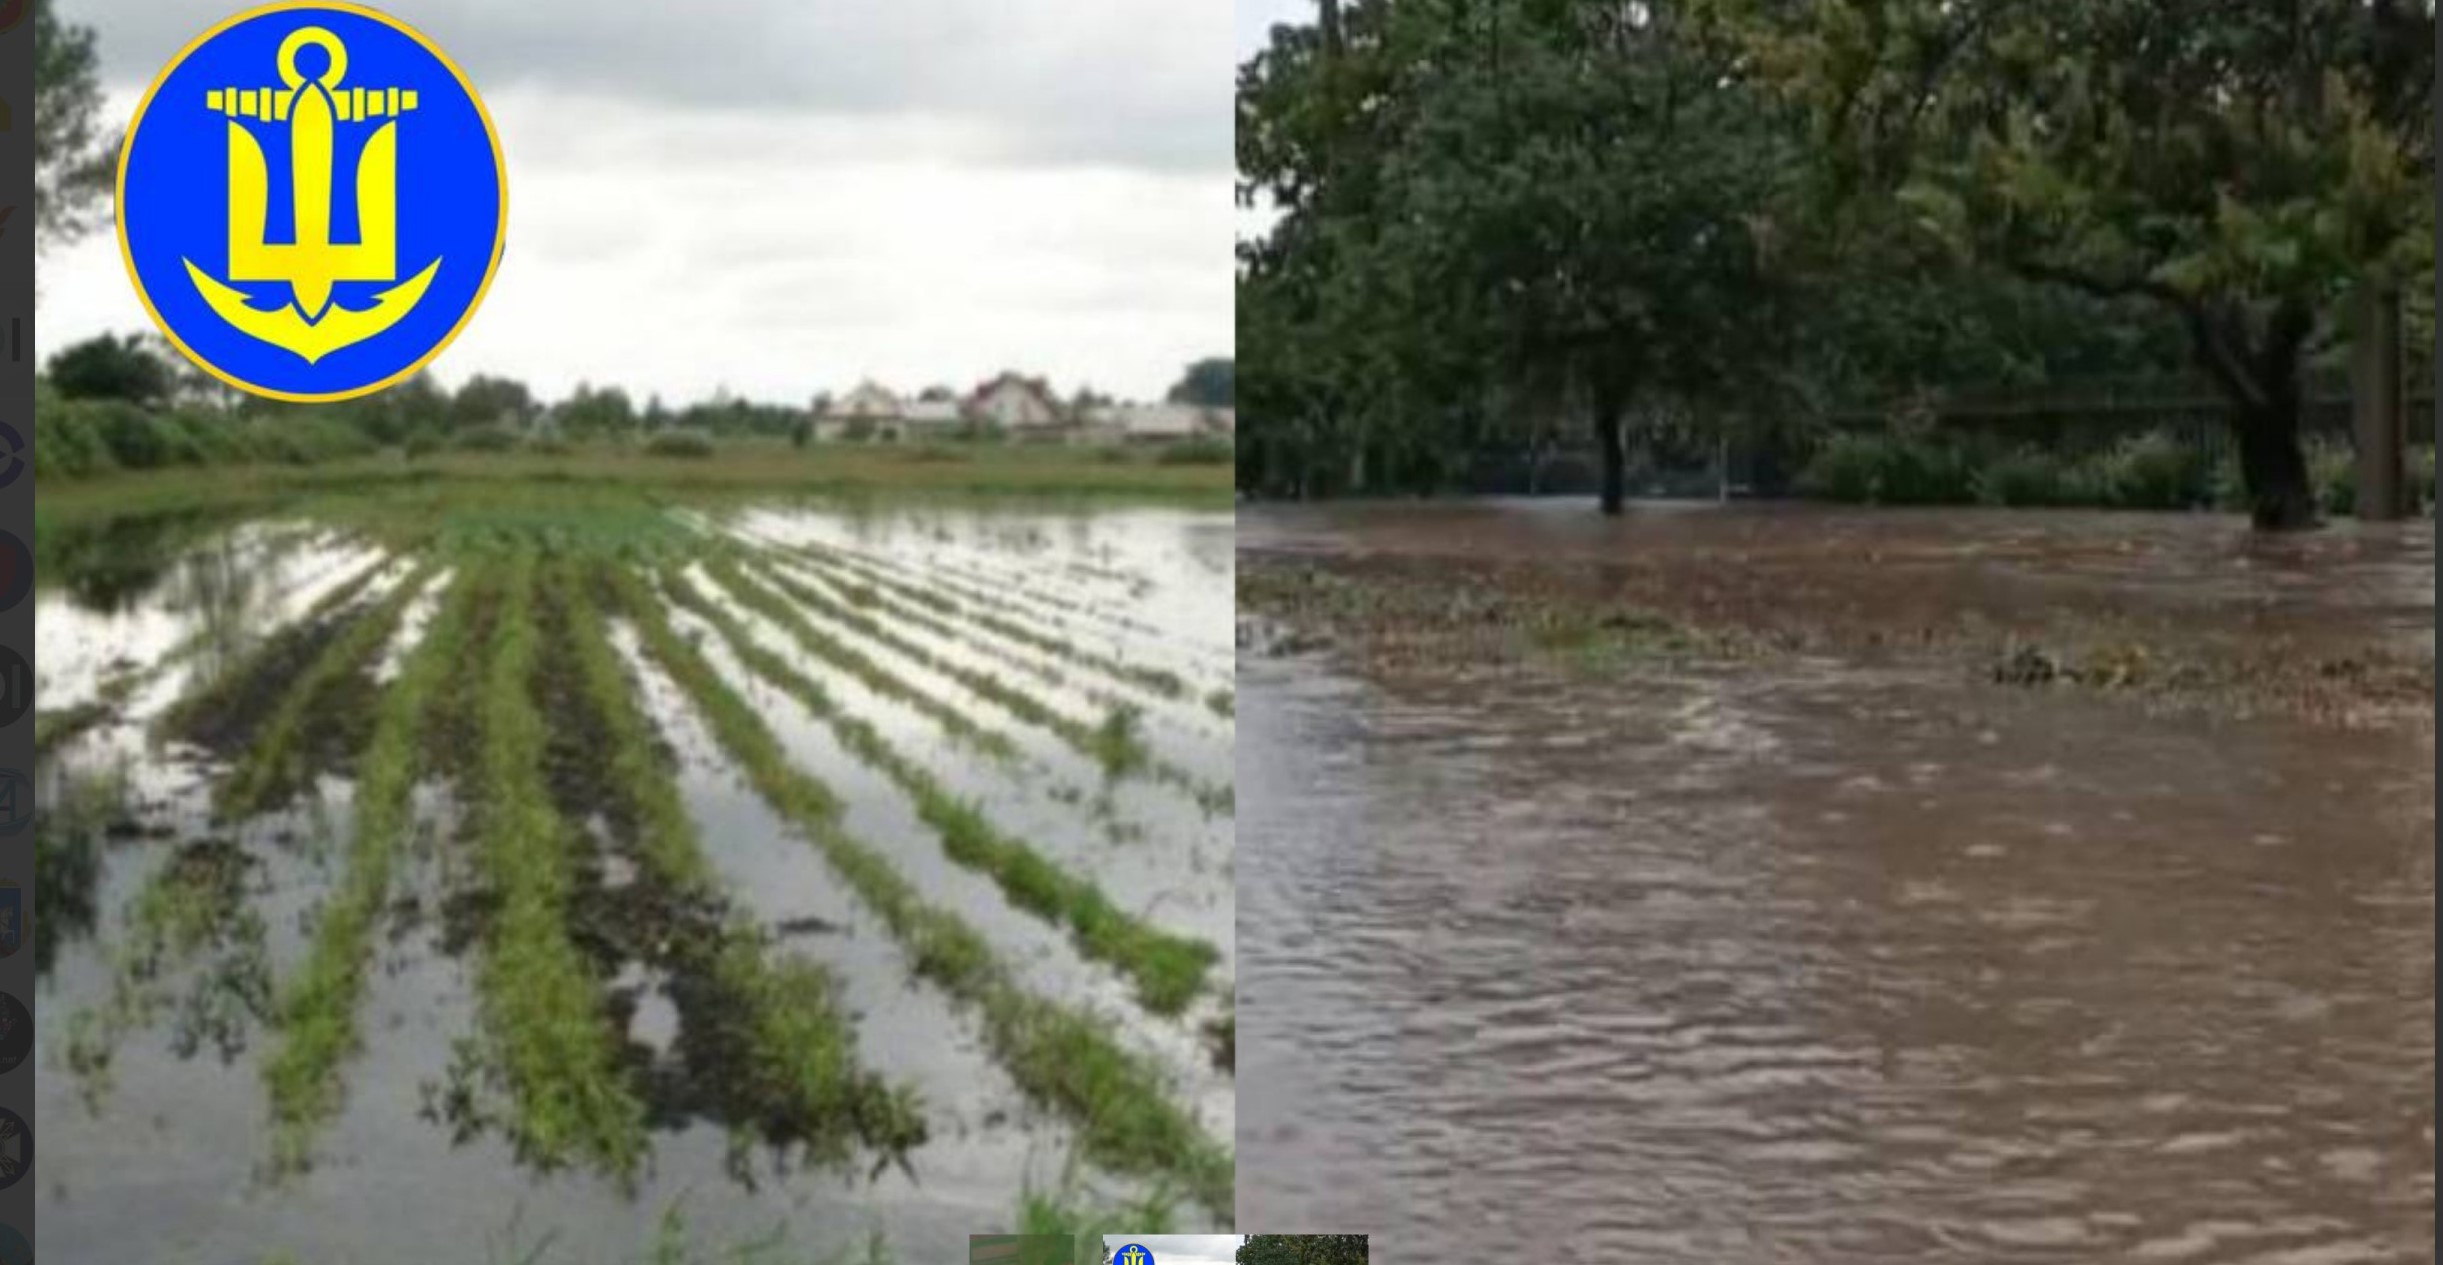 Yakymivka raion (Zaporizhzhia oblast) flooding caused by the Russians deliberately destroying dams Photos posted by Berdiansk online